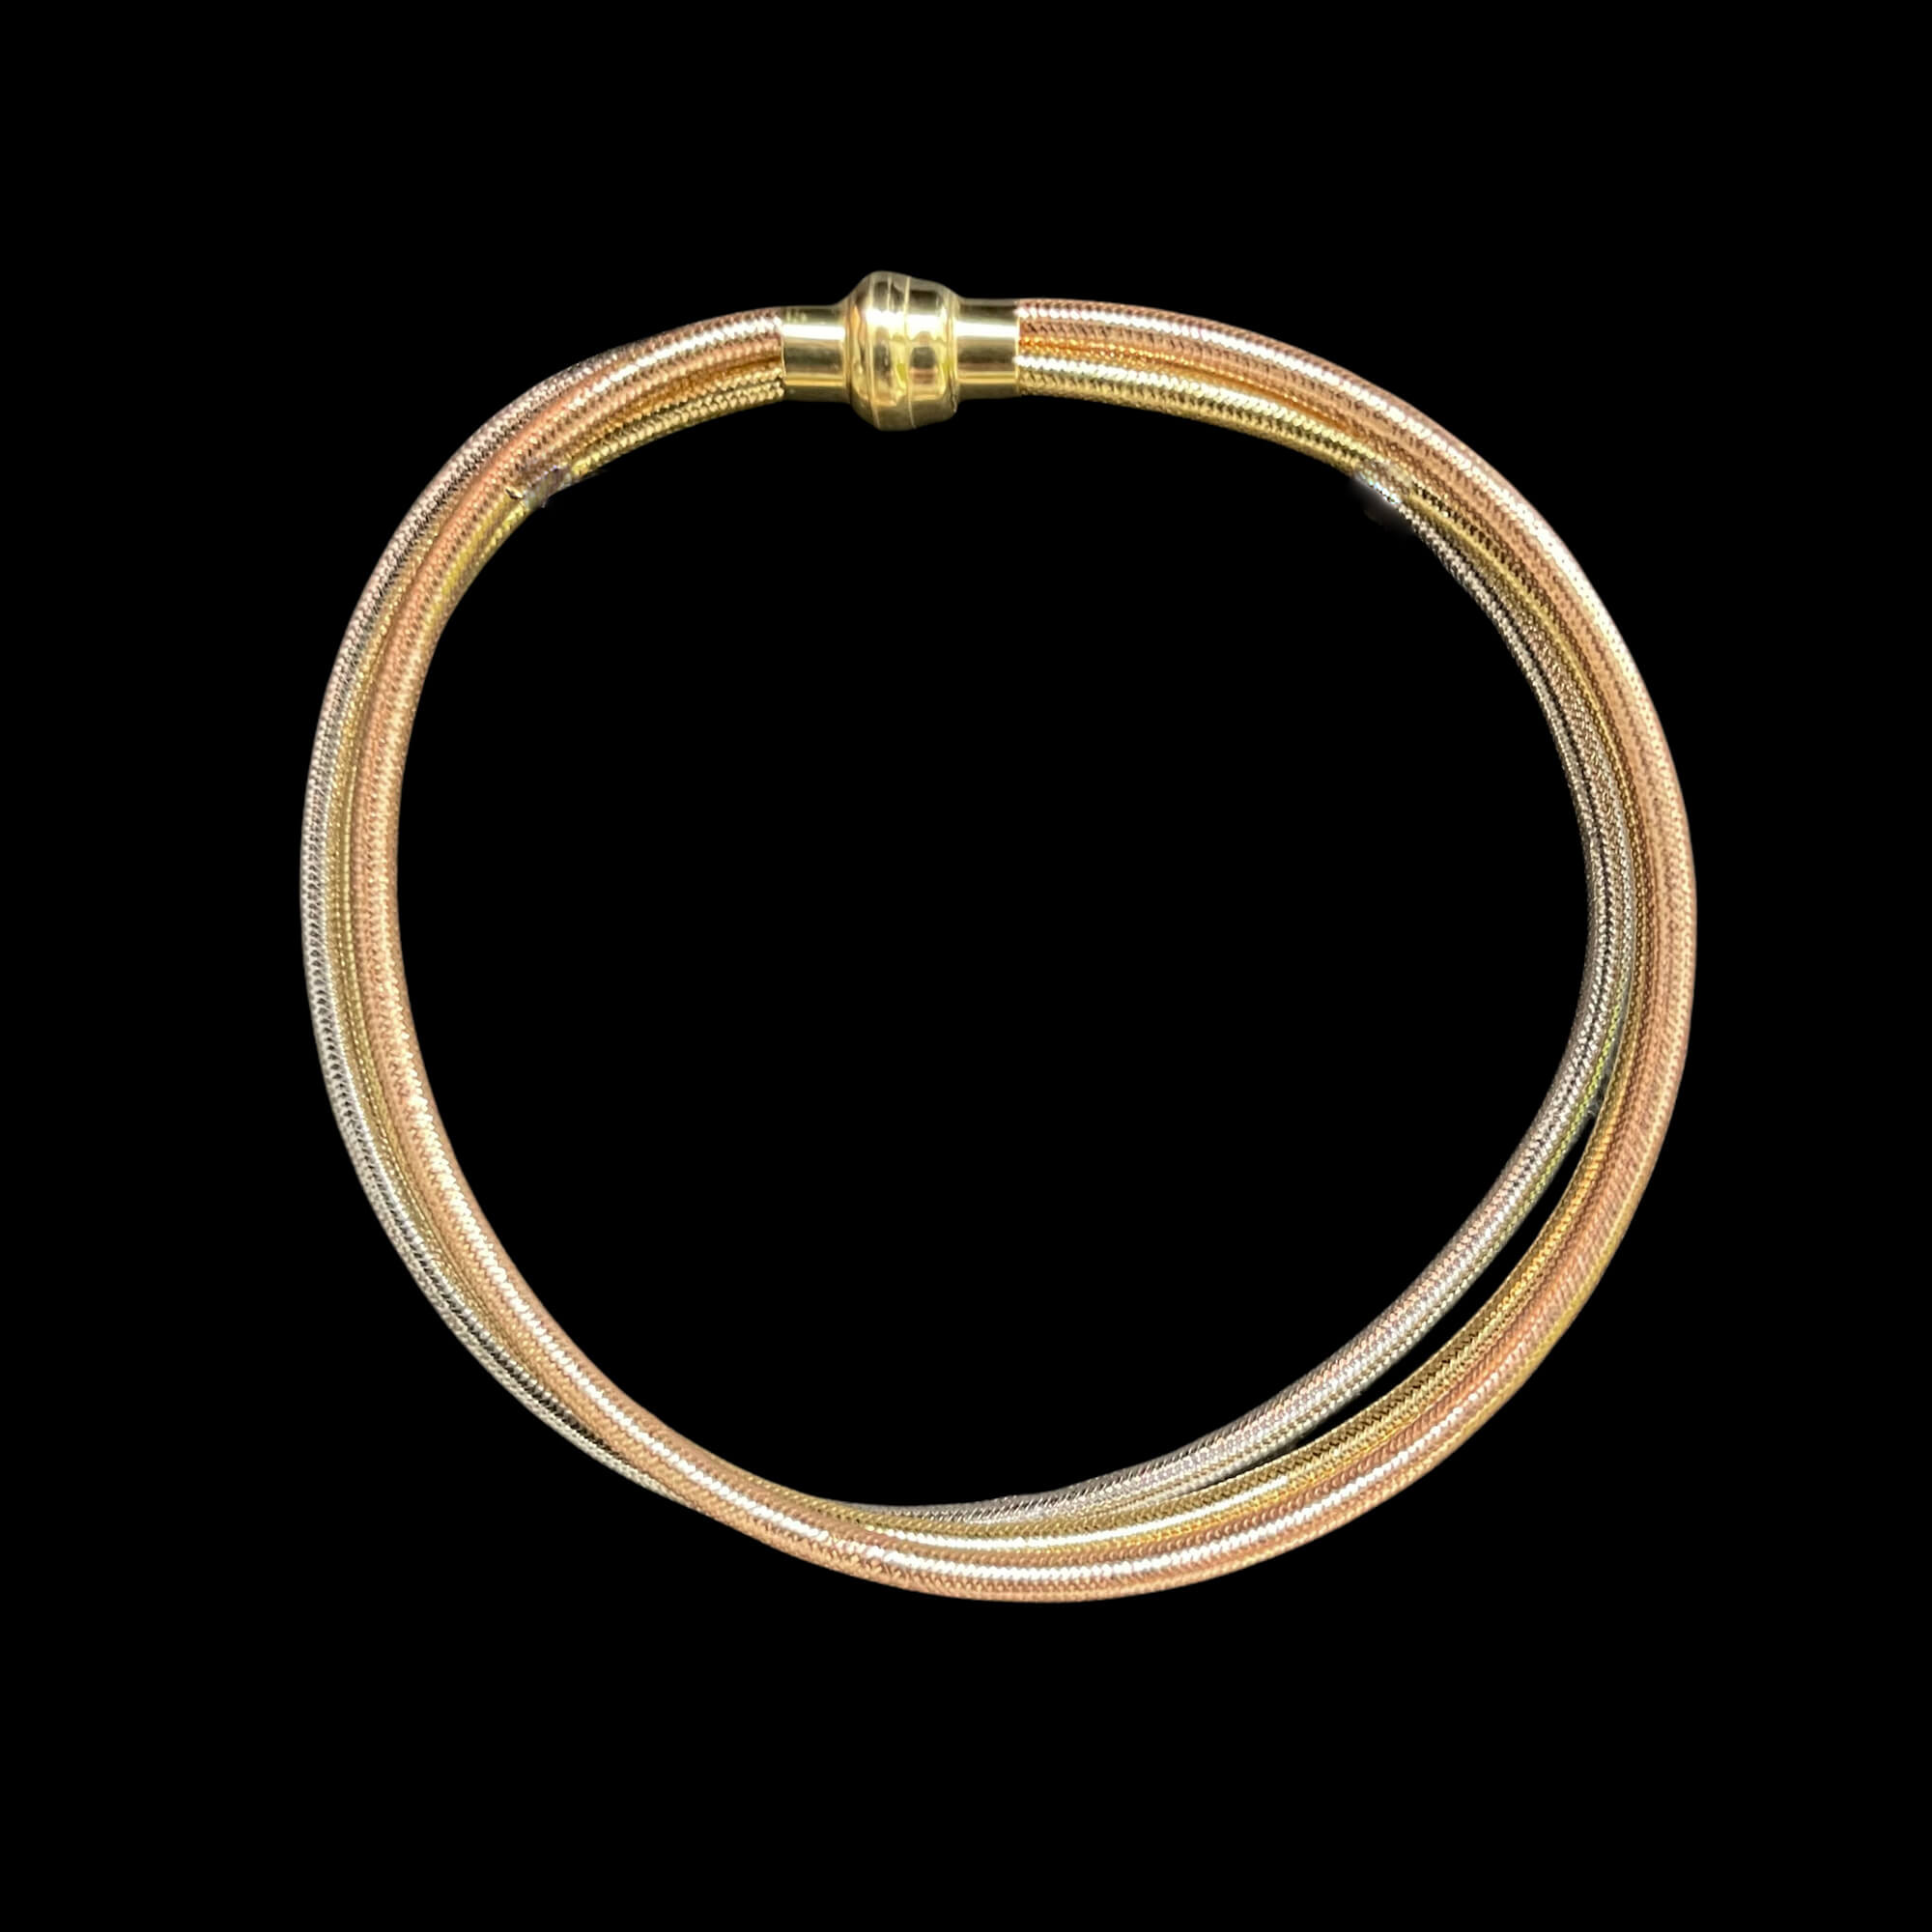 Three-wire Omega bracelet of 3-colors Gold 18kt and Silicone